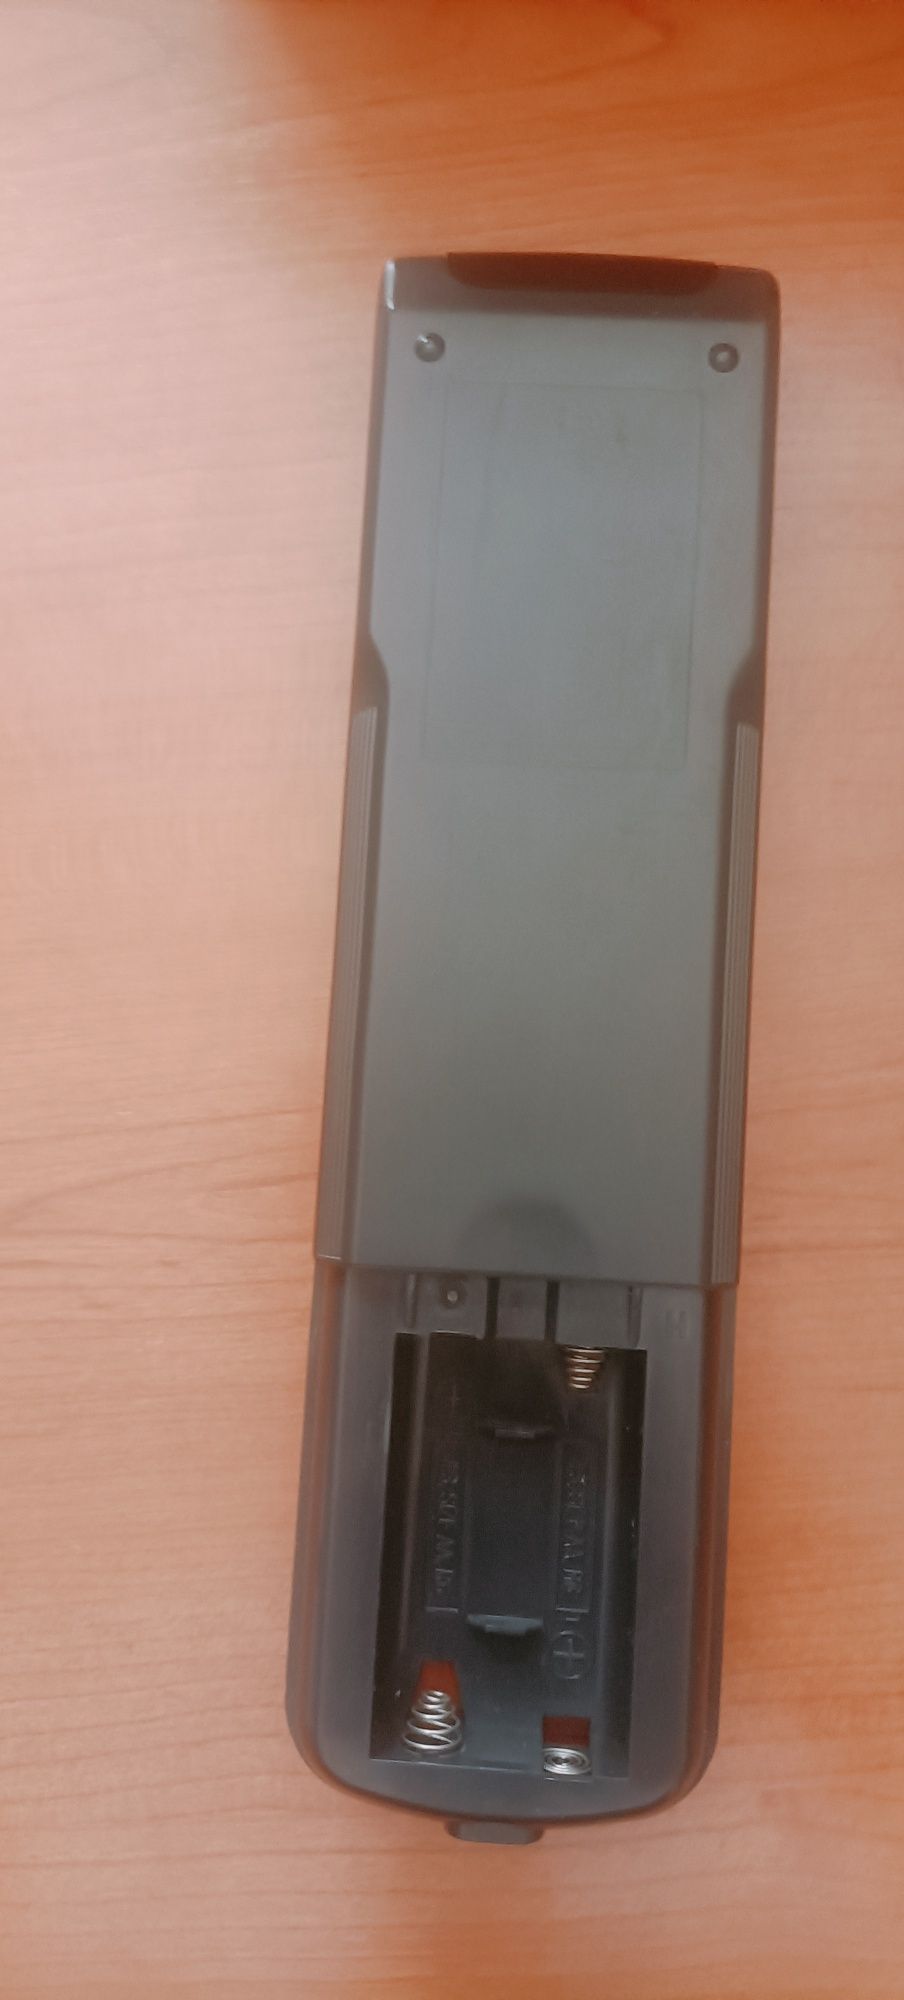 Leitor VHS Sony.